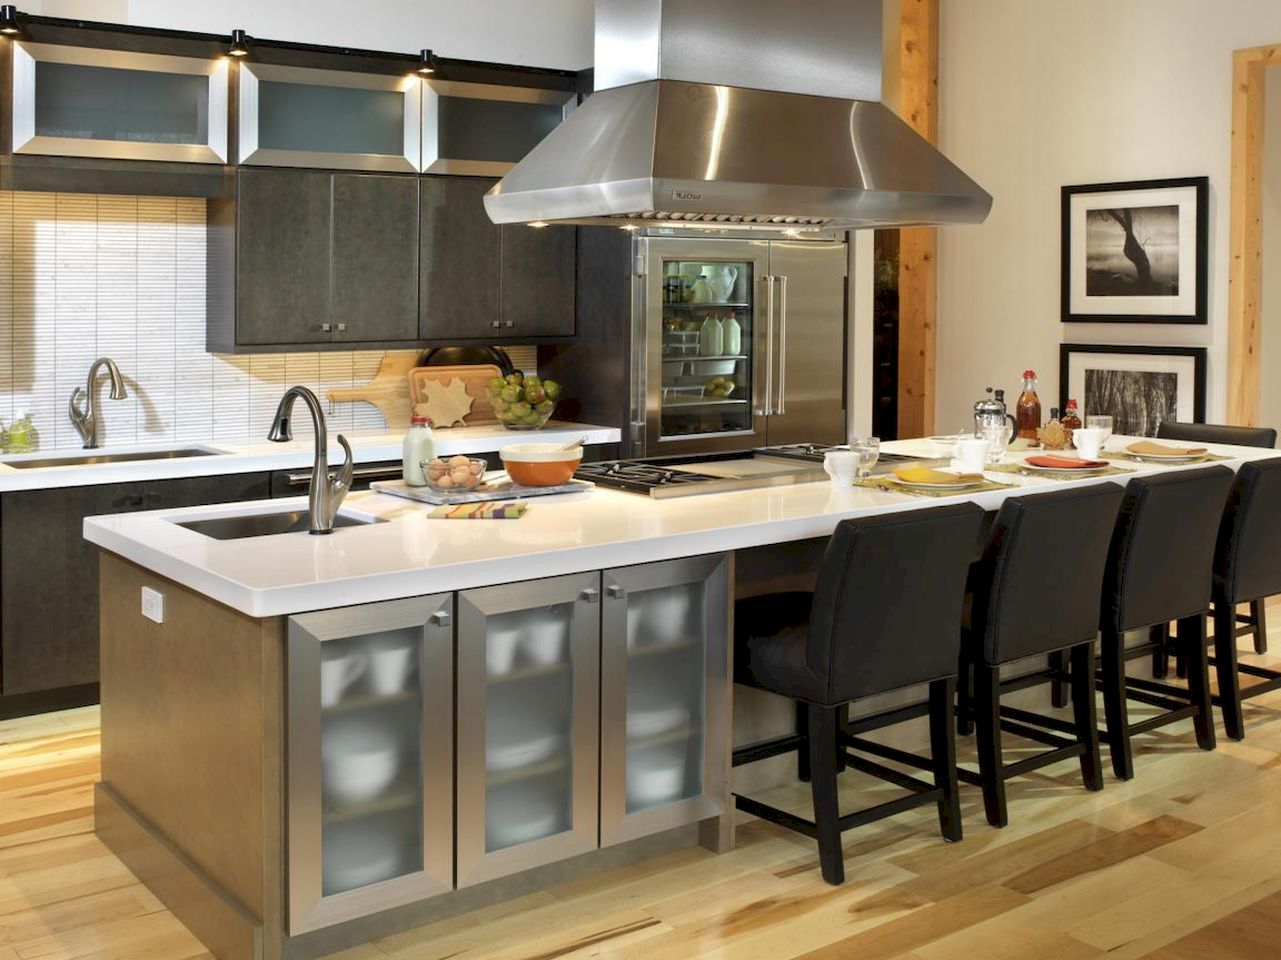 Kitchen Island With Seating And Storage photo - 4